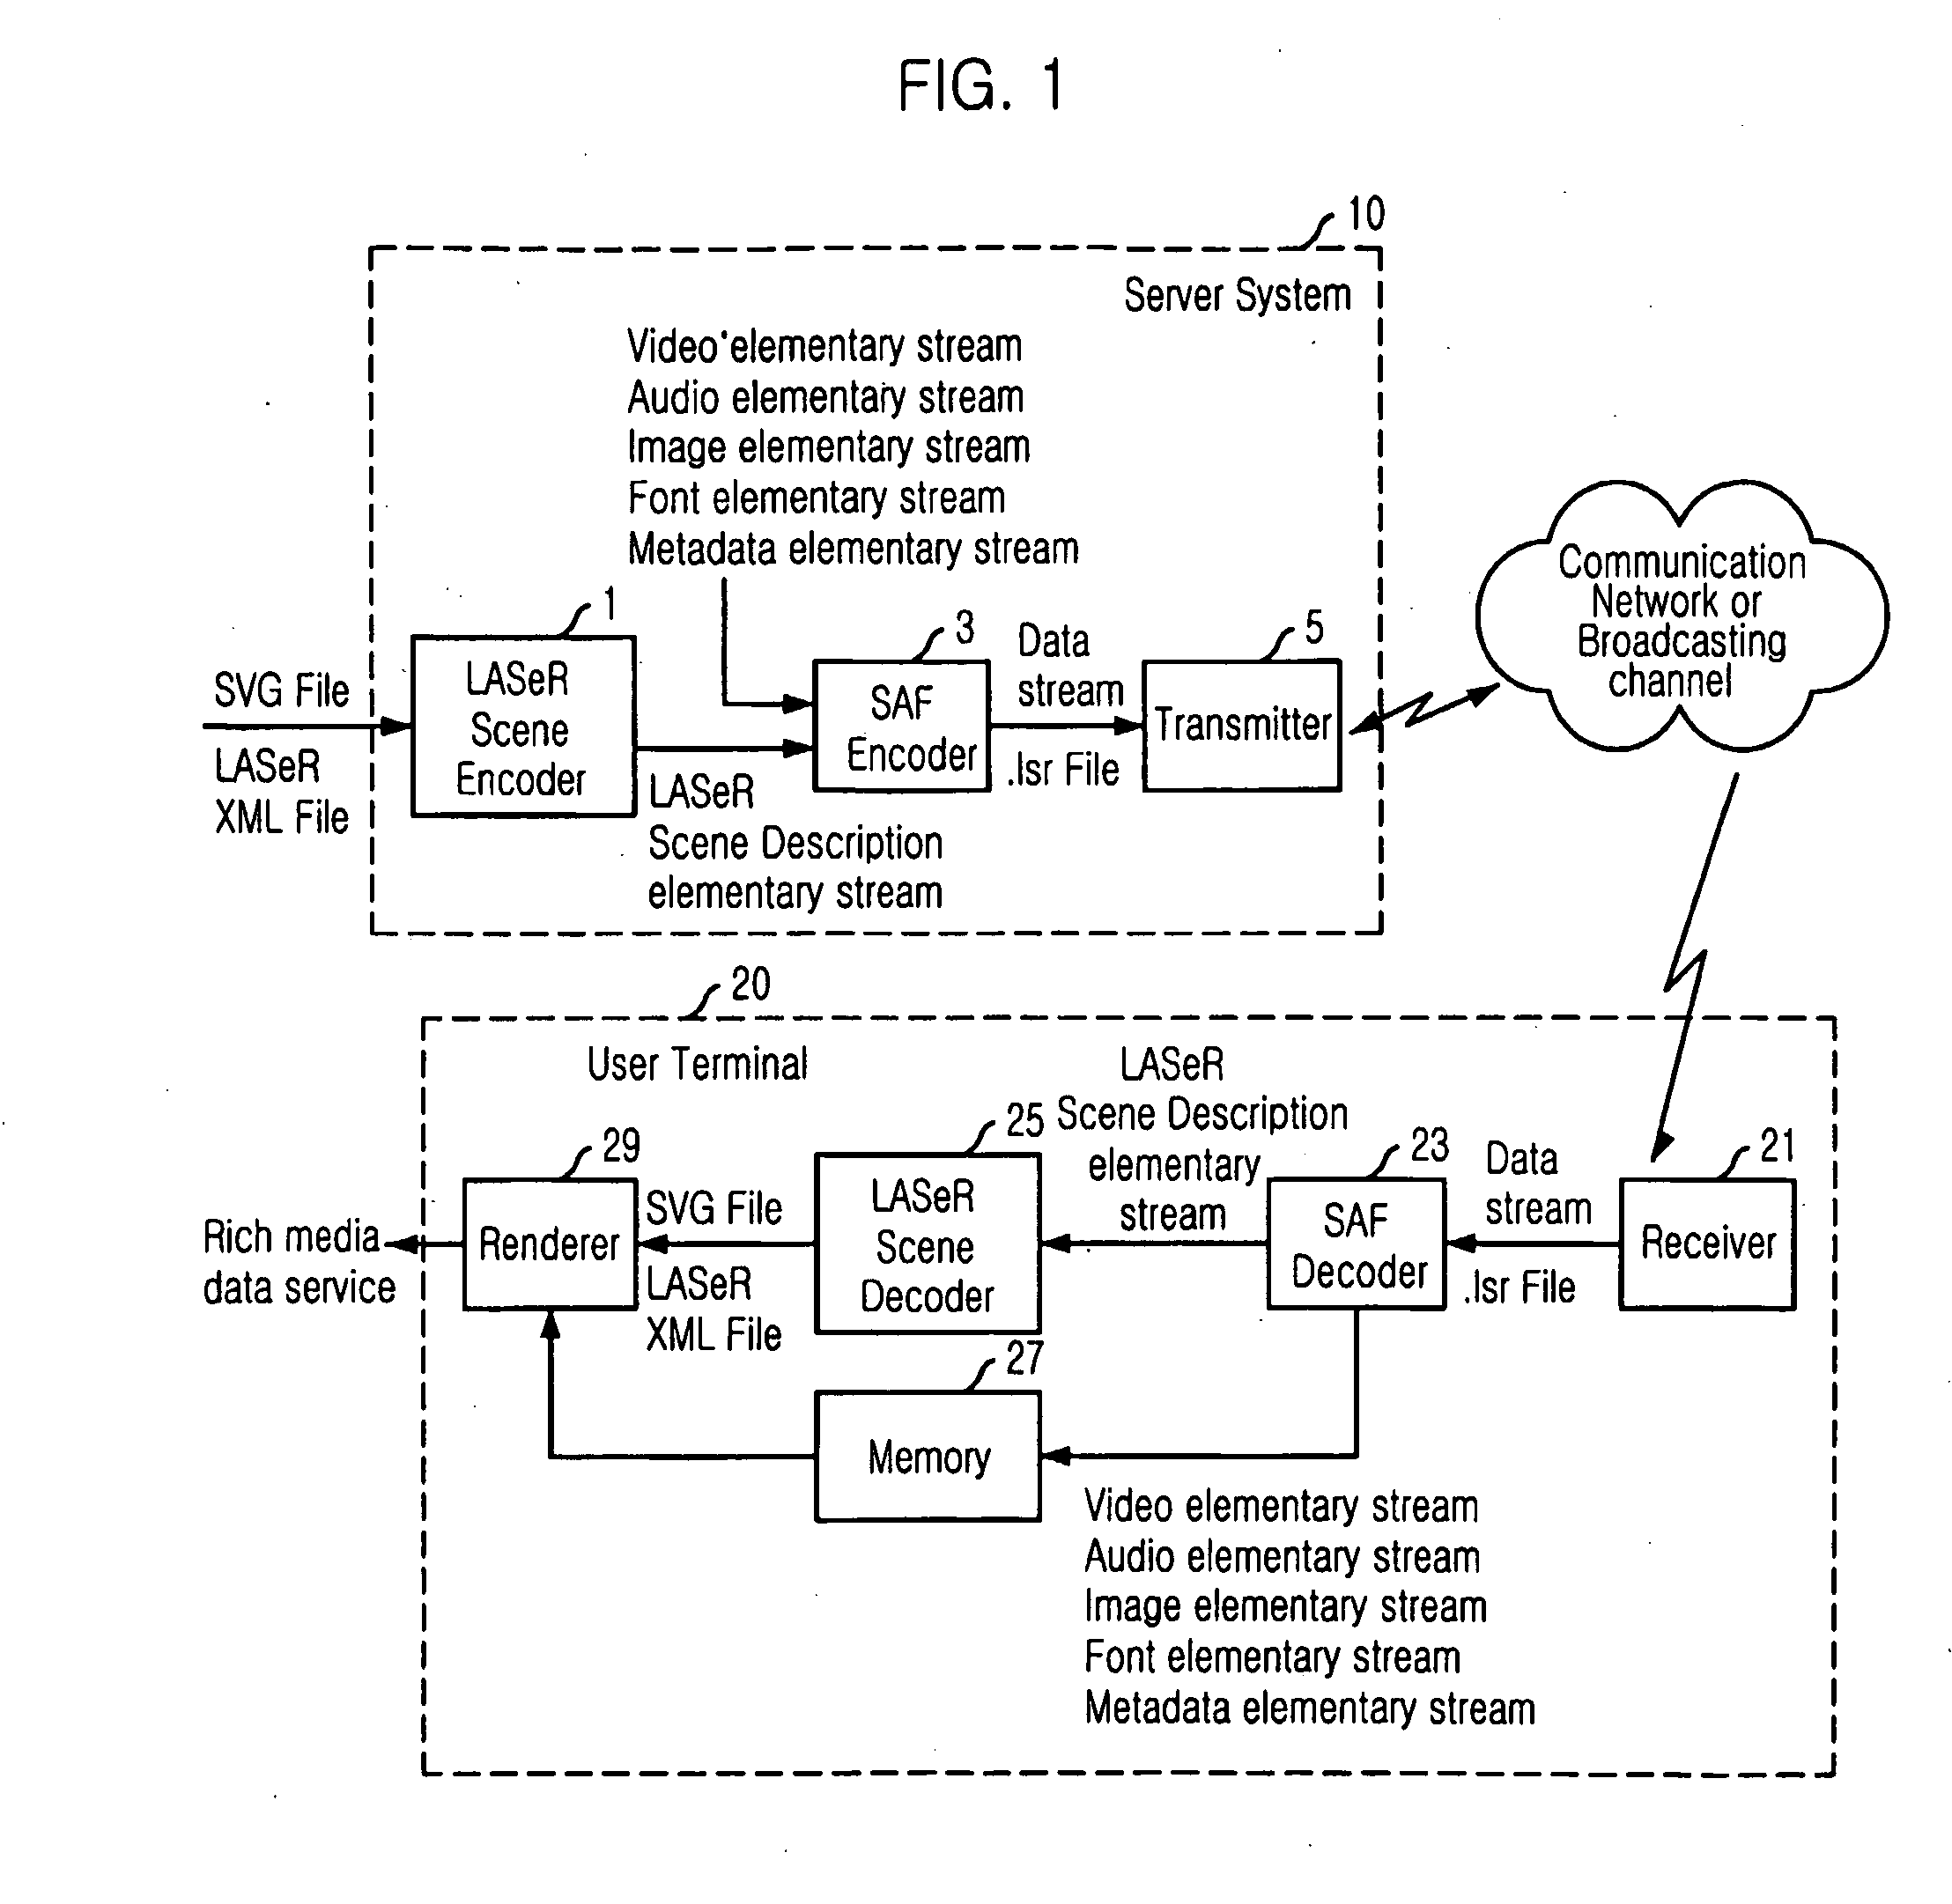 Saf Synchronization Layer Packet Structure and Server System Therefor